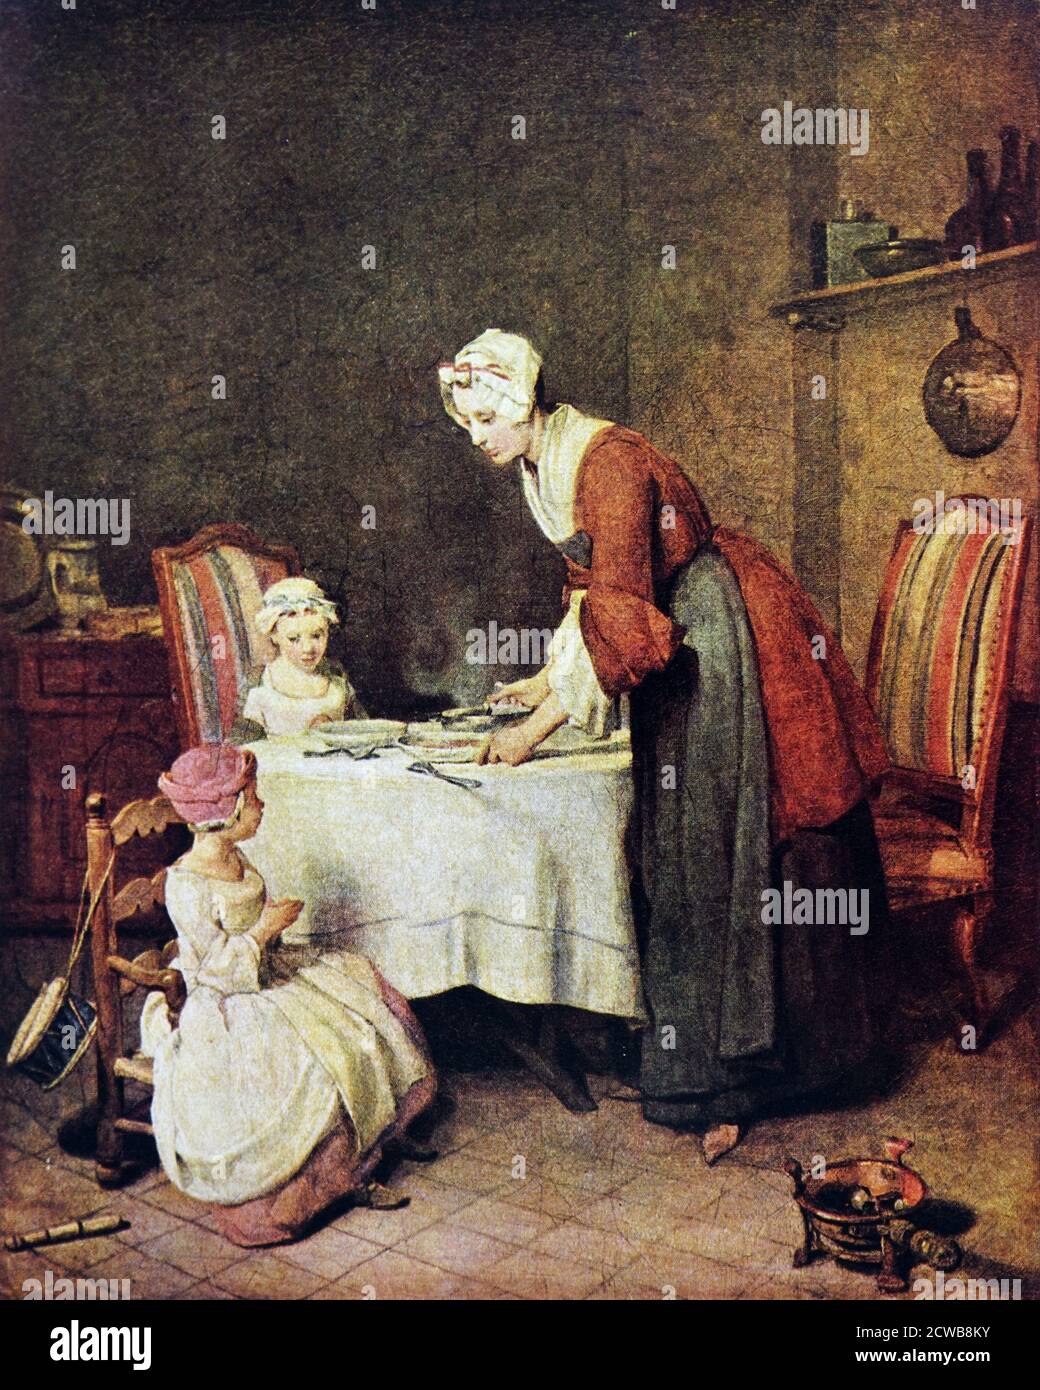 Painting titled 'Prayer before Meal' by Jean-Baptiste-Simeon Chardin. Jean-Baptiste-Simeon Chardin (1699-1779) a French painter Stock Photo